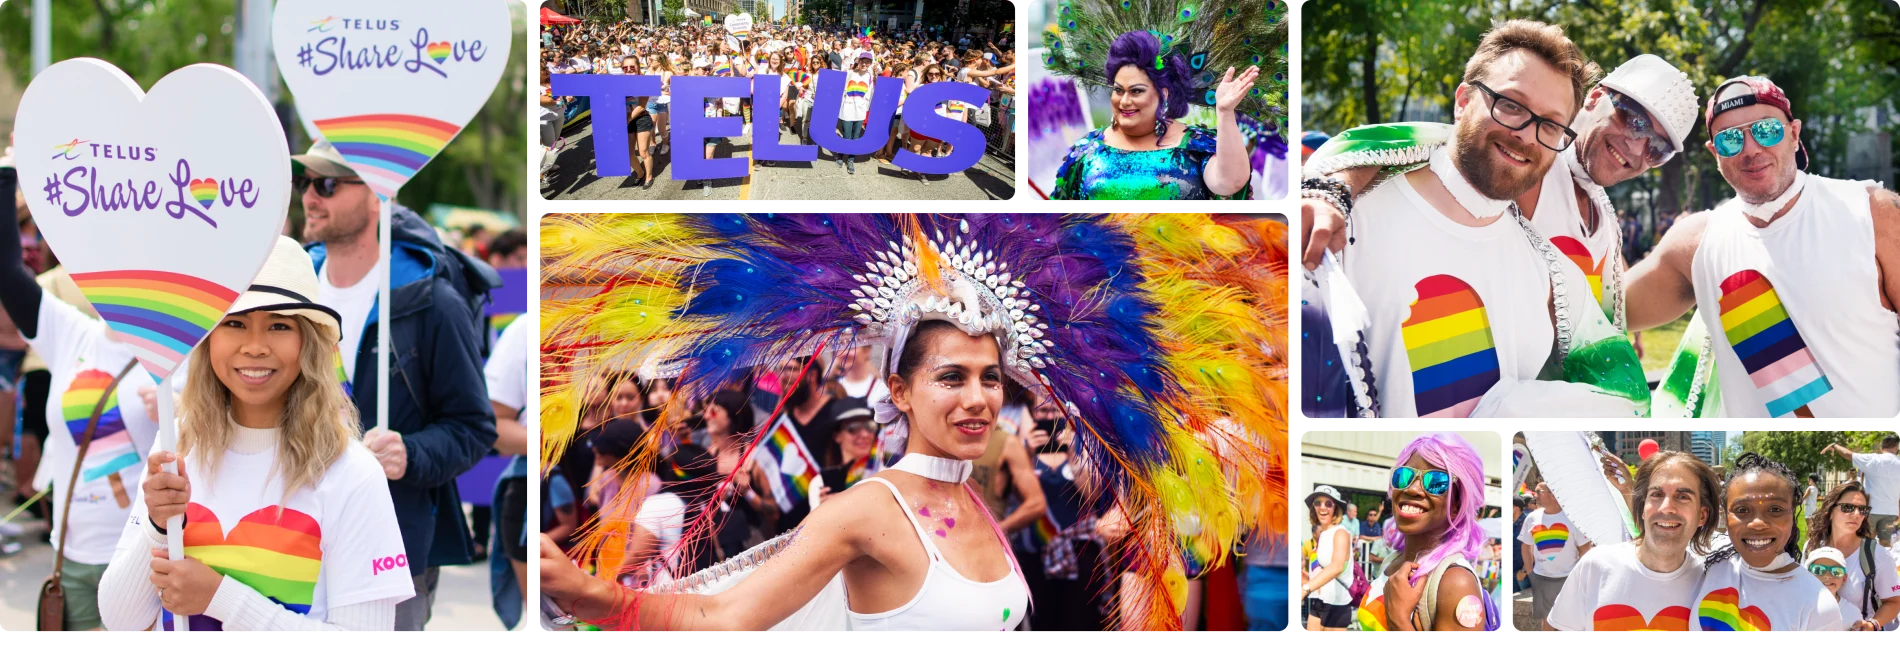 A collage of images of people attending Pride parades